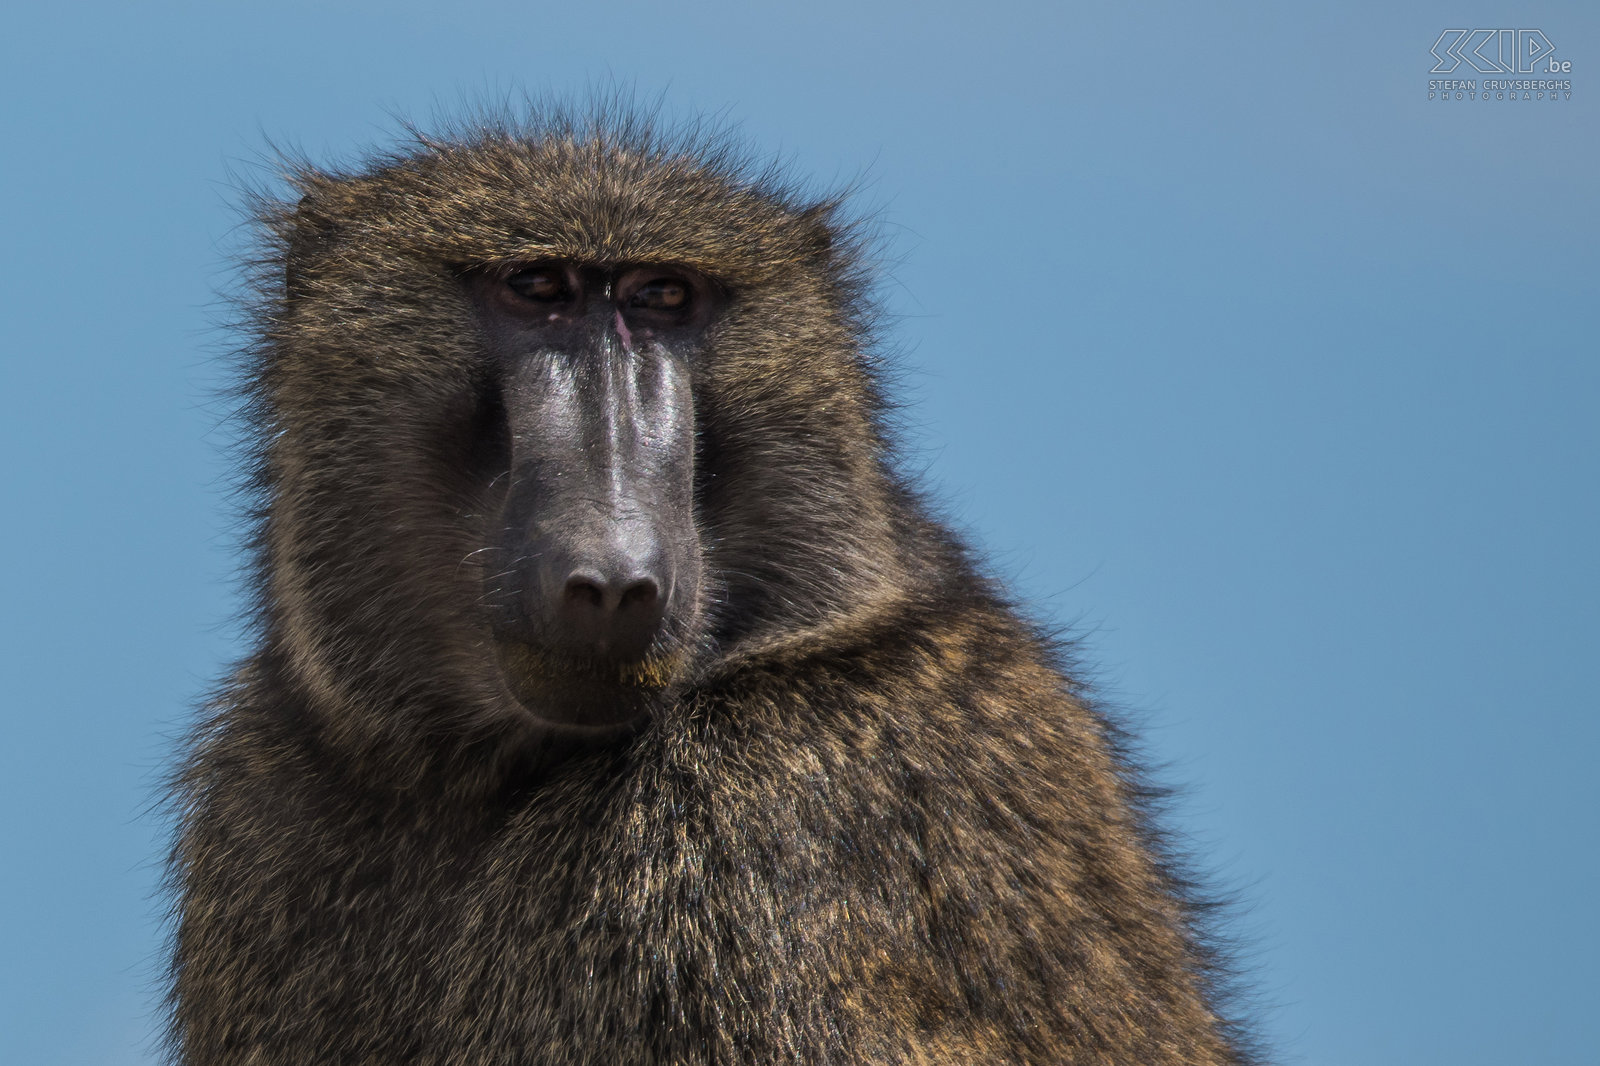 Bulbula Cliffs - Olive baboon The olive baboon (Papio anubis) is a big strong monkey species and an omnivorous opportunist. He mainly eats grass, roots, leaves and fruit, but also insects and small vertebrates. Stefan Cruysberghs